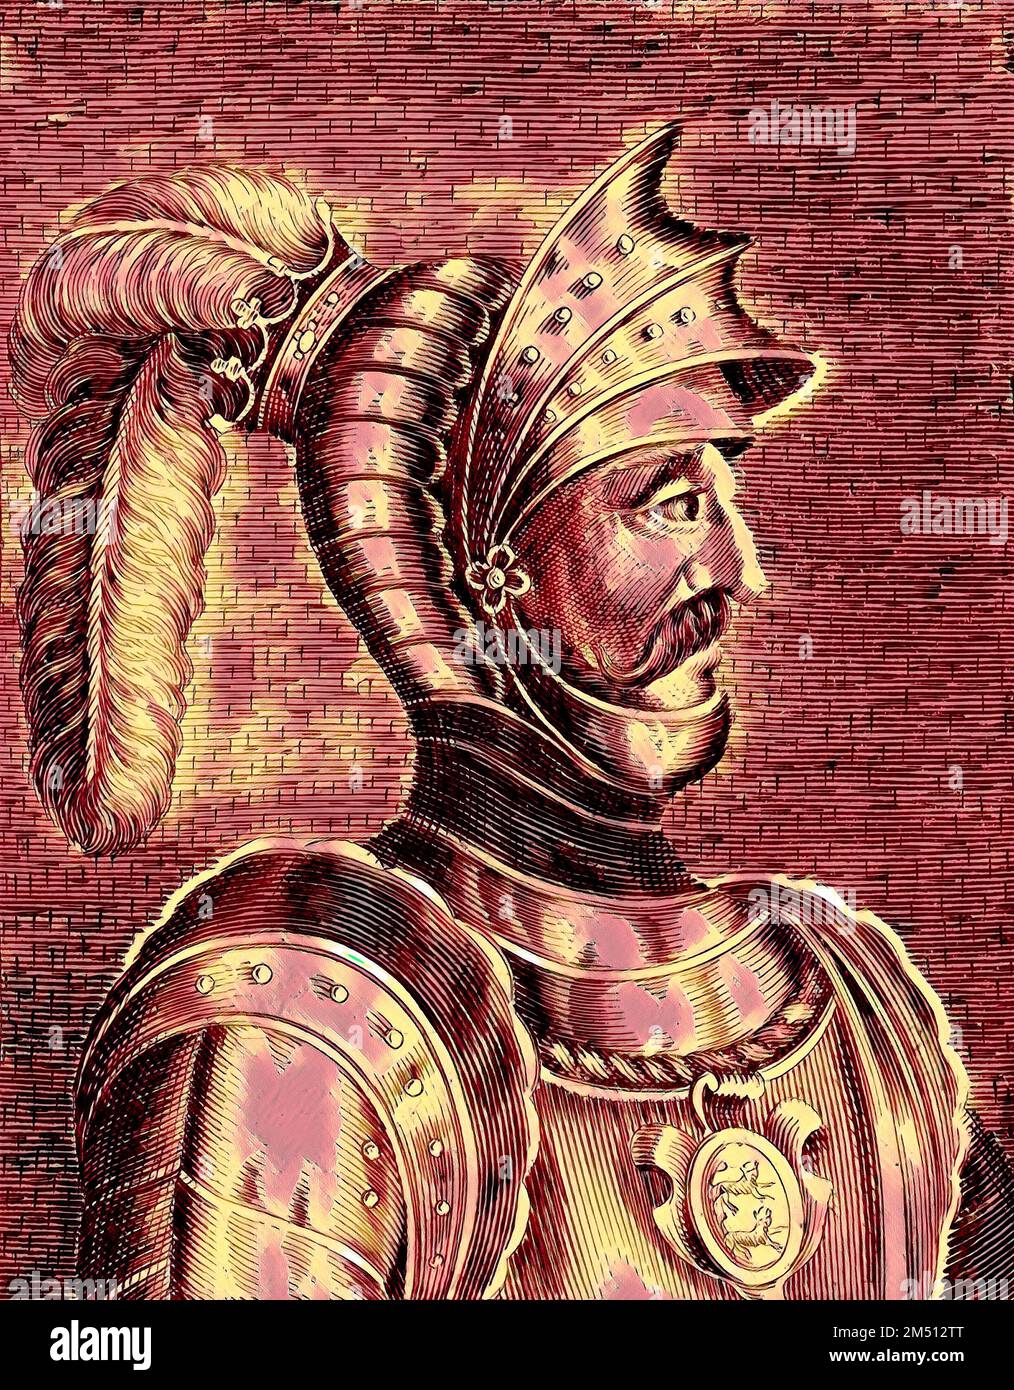 William I, ca. 1028 - 1087, known as William the Conqueror, the first Norman King of England, digitally altered Stock Photo